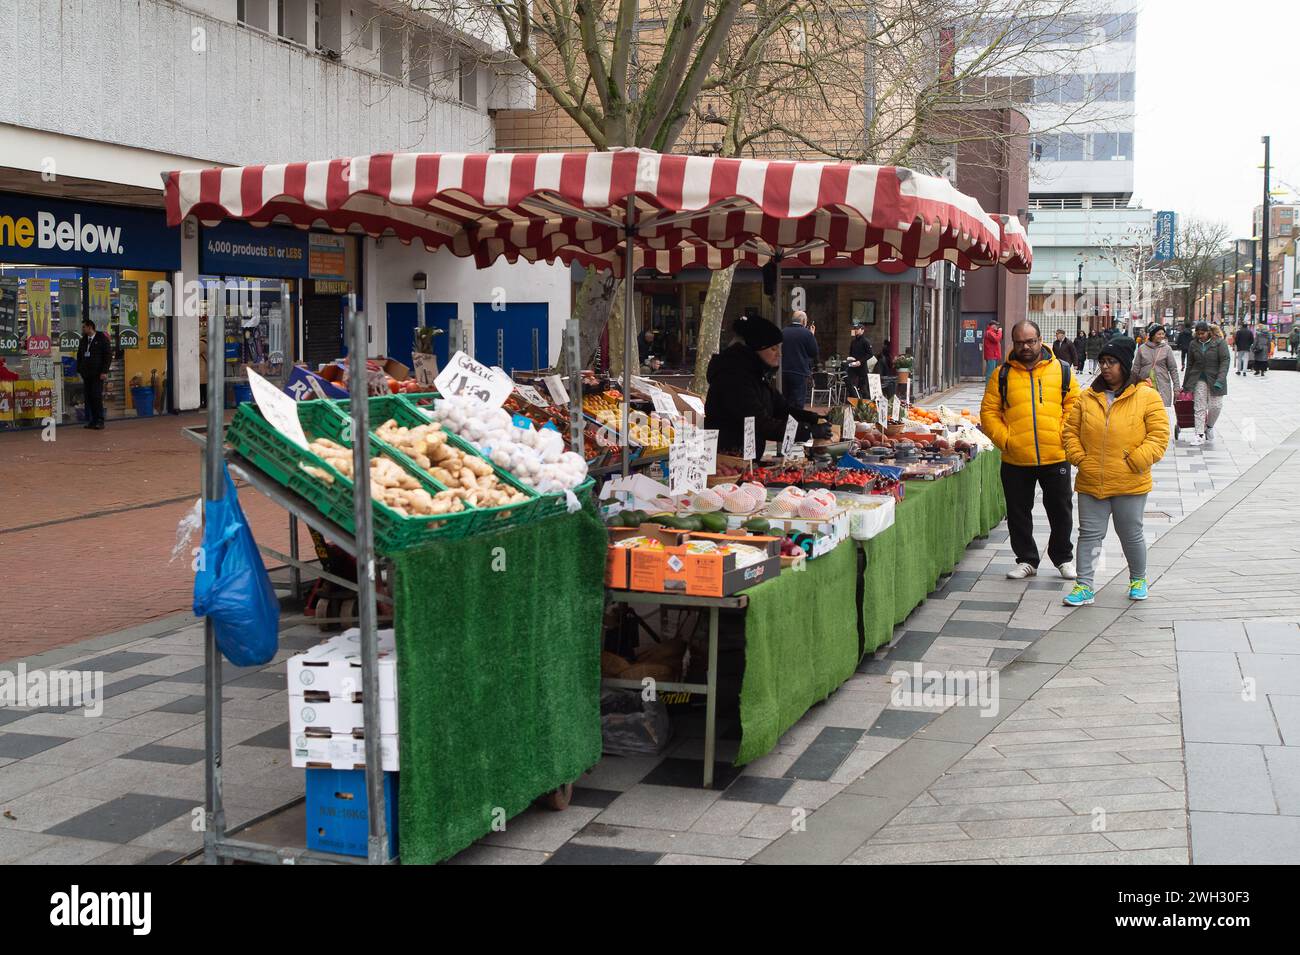 Slough, Berkshire, UK. 7th February, 2024. Shoppers at a fruit and veg stall in Slough High Street, Berkshire. Credit: Maureen McLean/Alamy Stock Photo